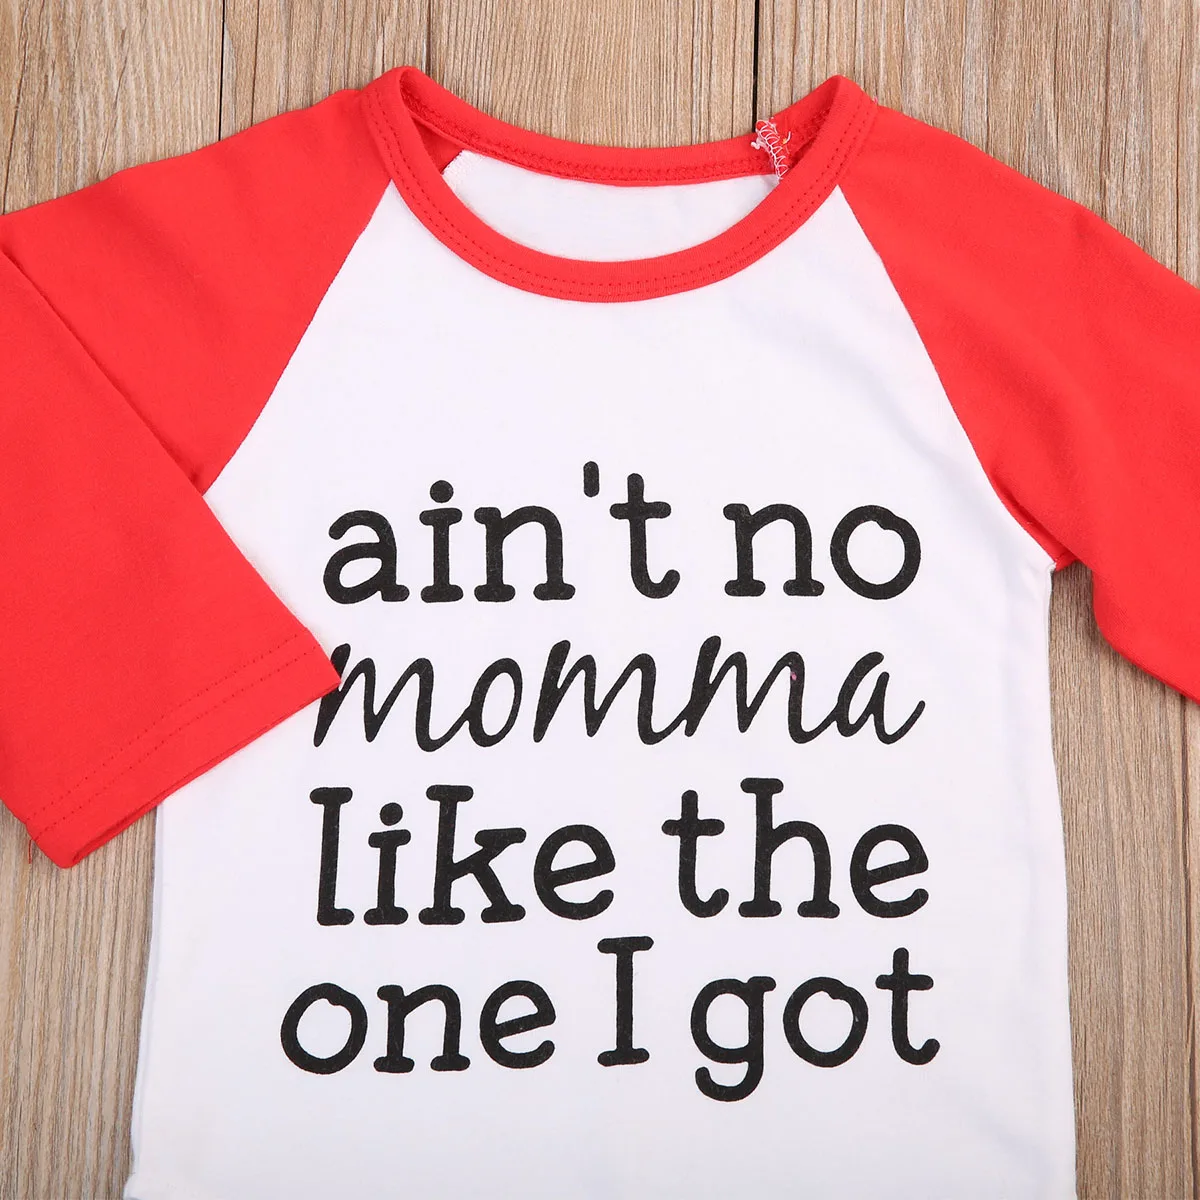 New-Fashion-T-shirts-Newborn-Infant-Kids-Baby-Boy-Tops-Cotton-Long-Sleeve-Letter-Print-Infant-Boys-Loose-Clothes-T-shirt-Tops-3